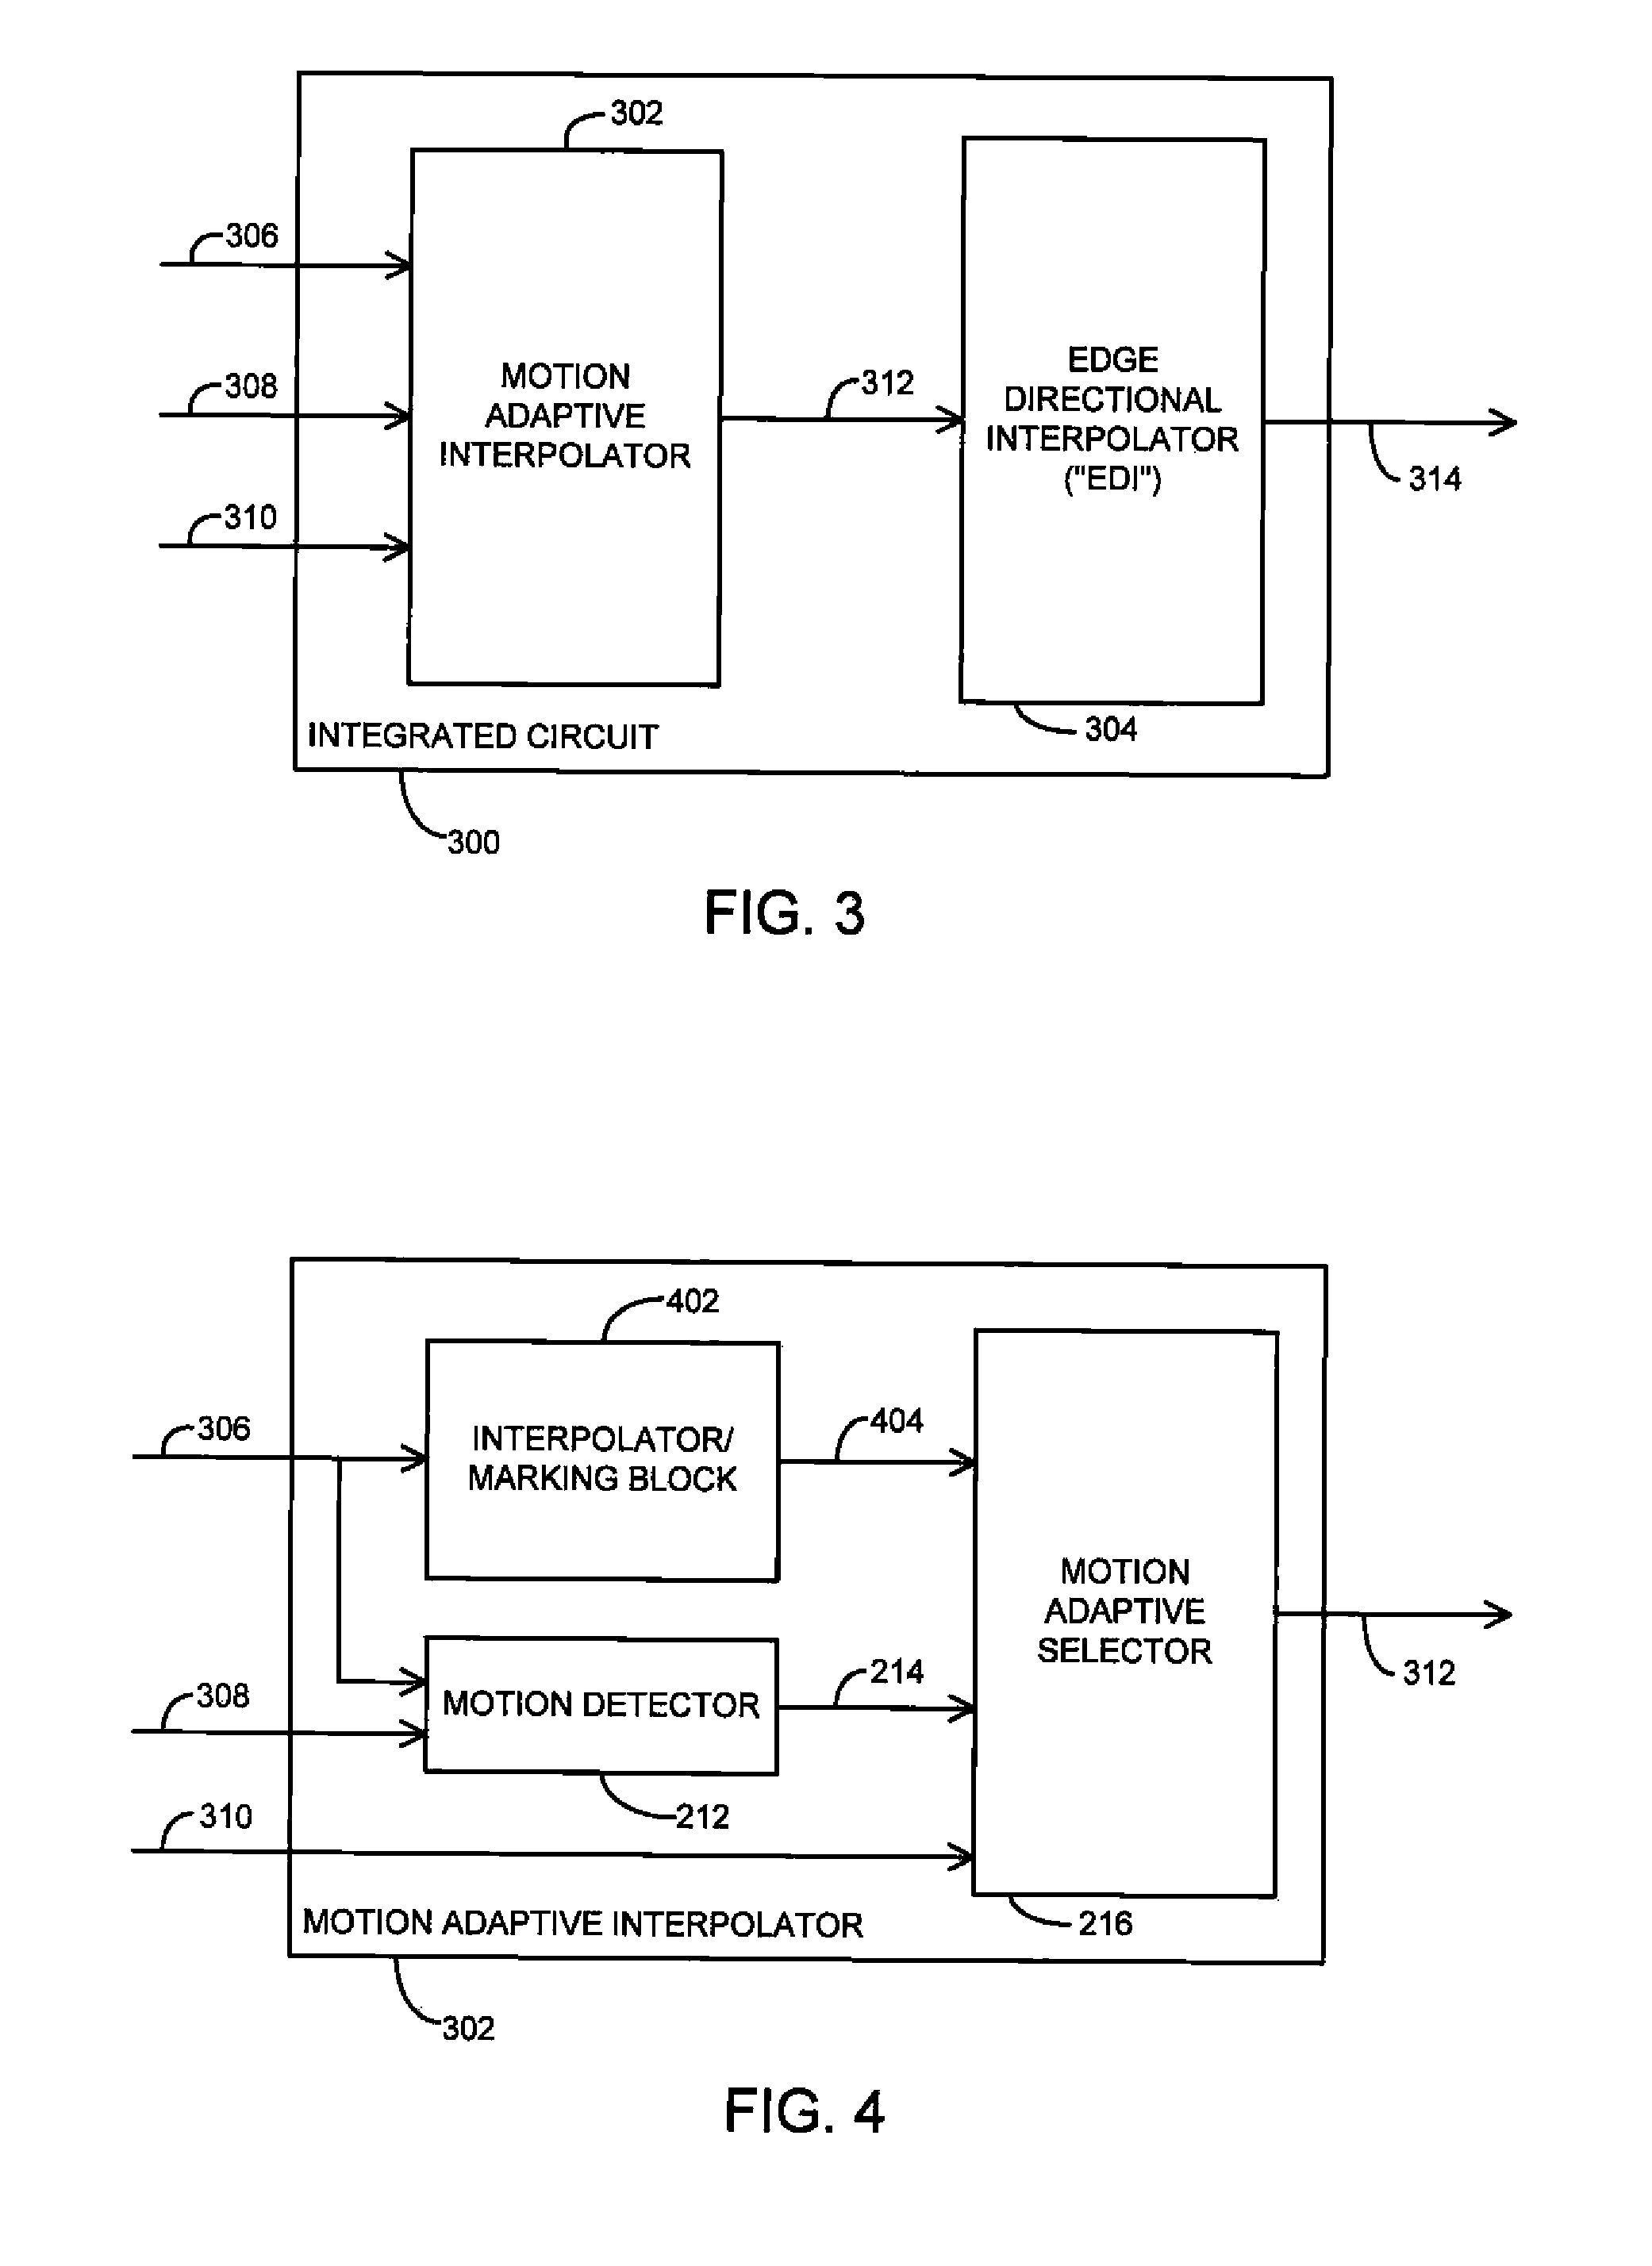 Method and apparatus for high quality video motion adaptive edge-directional deinterlacing